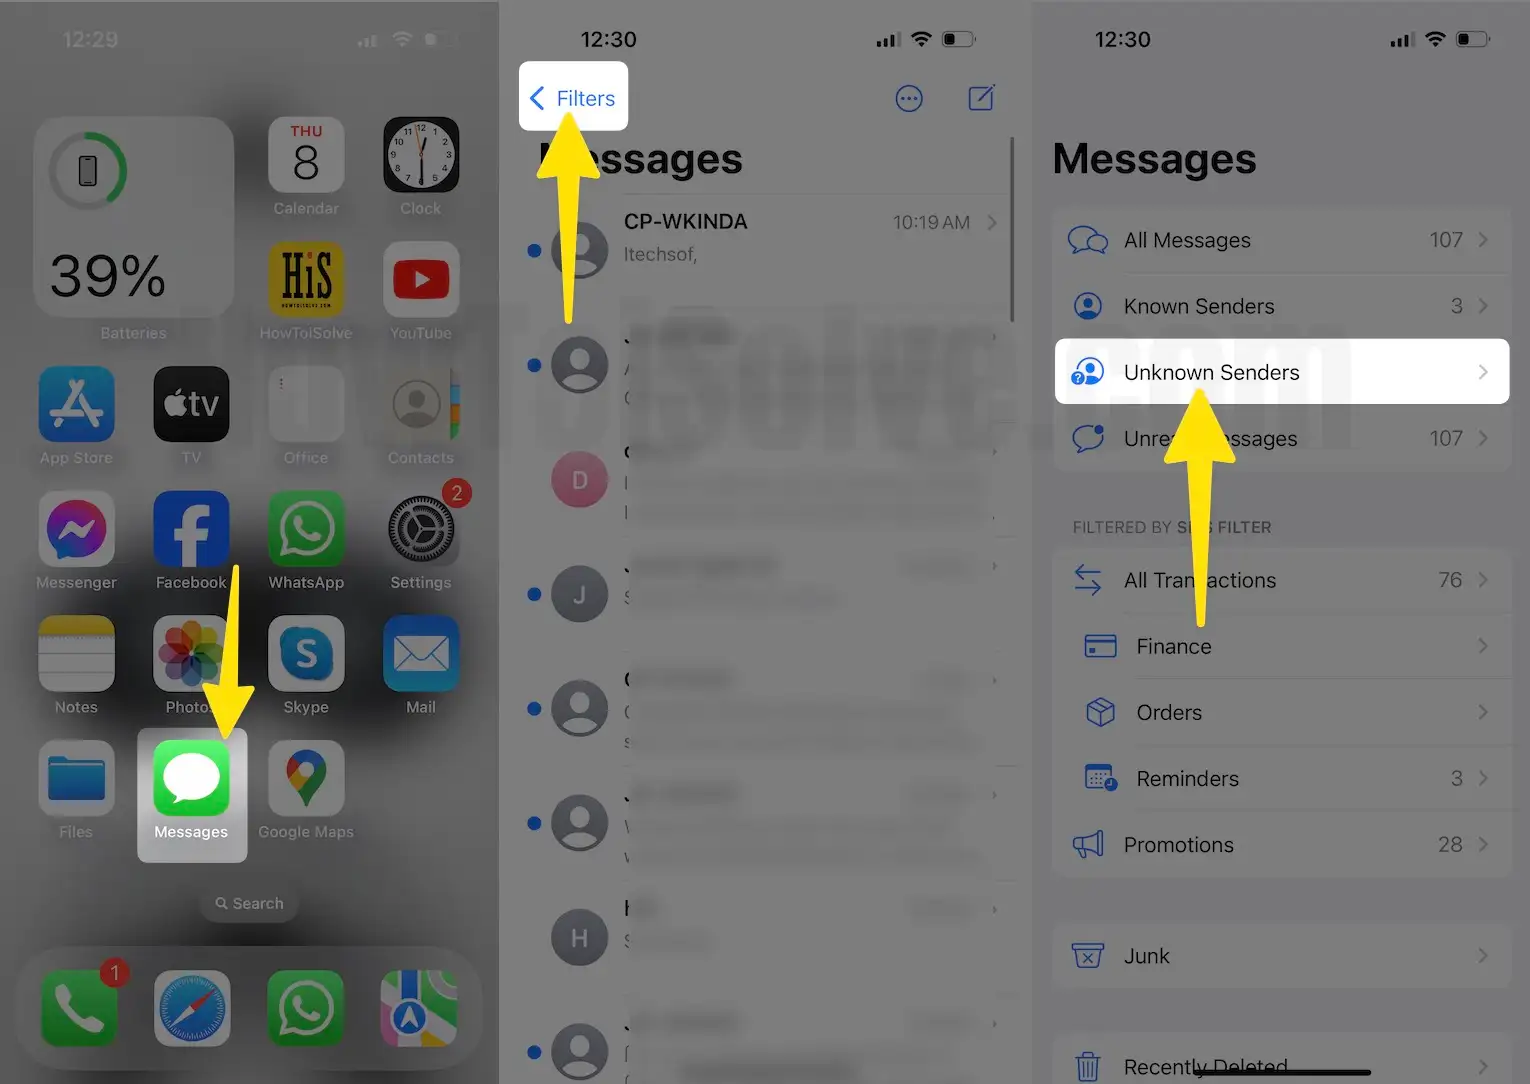 Open messages app tap < filters select unknown senders on iPhone